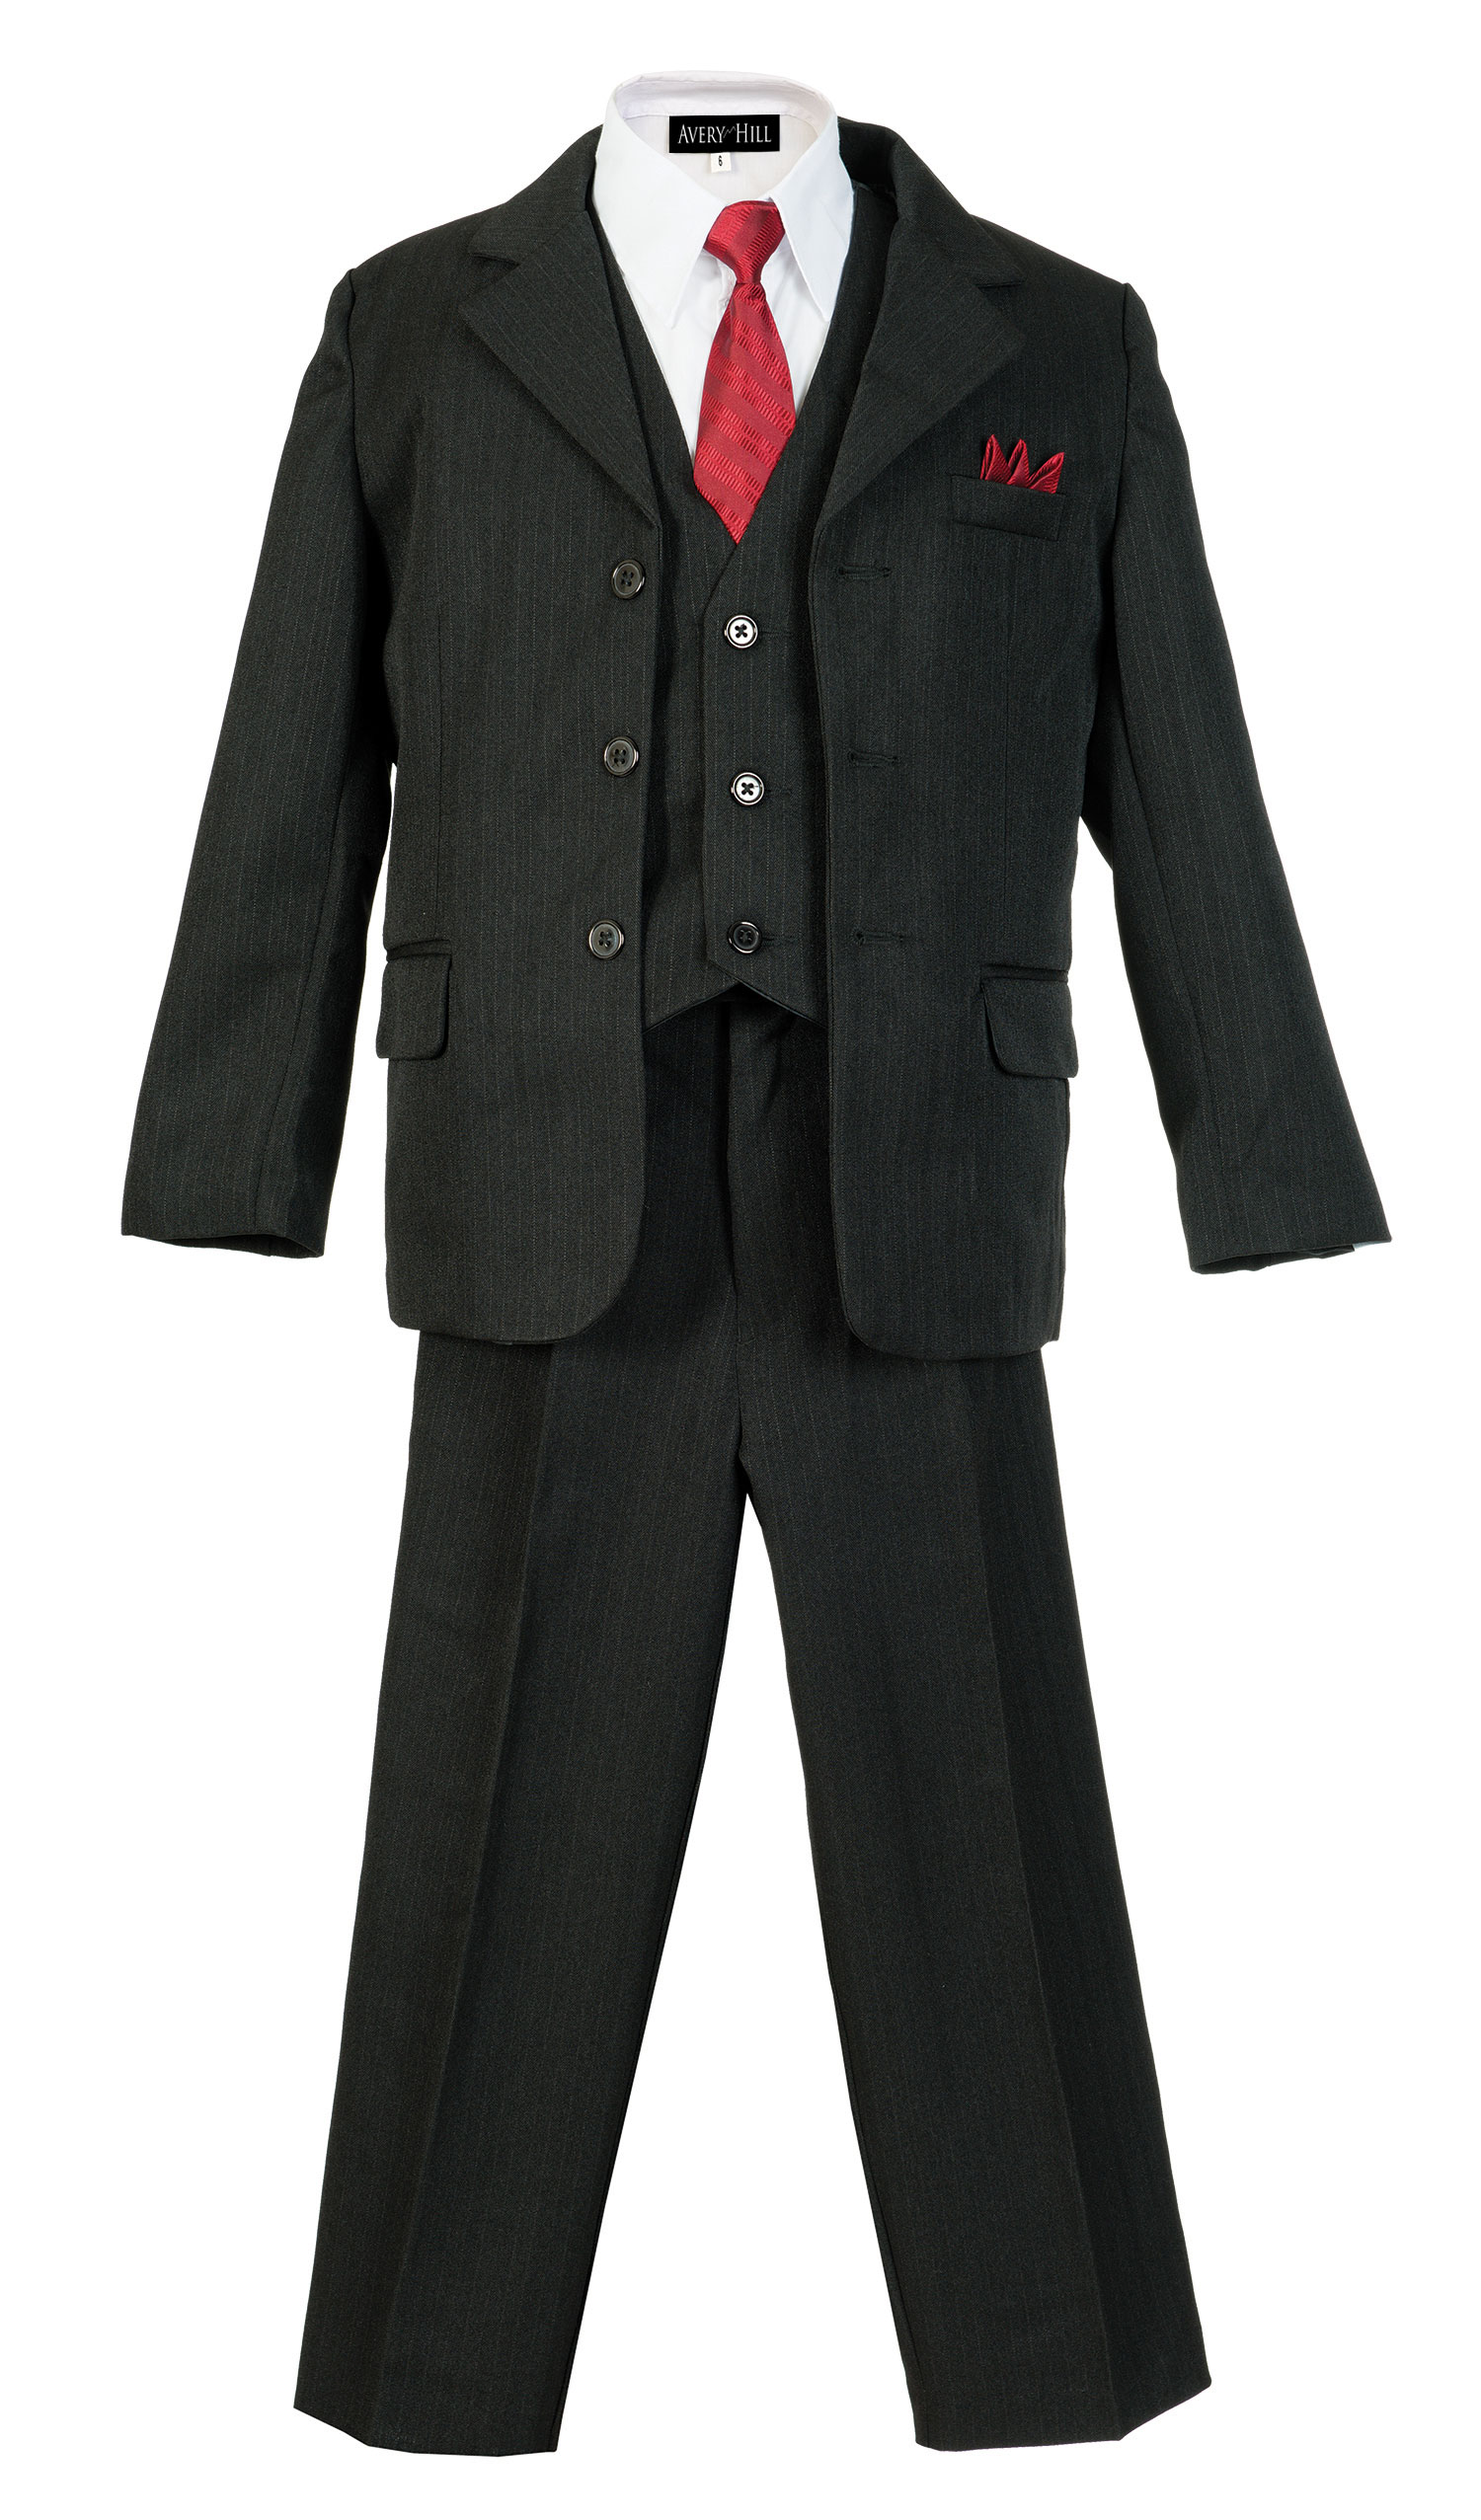 Boys Pinstripe Suit Set with Matching Tie BK 16